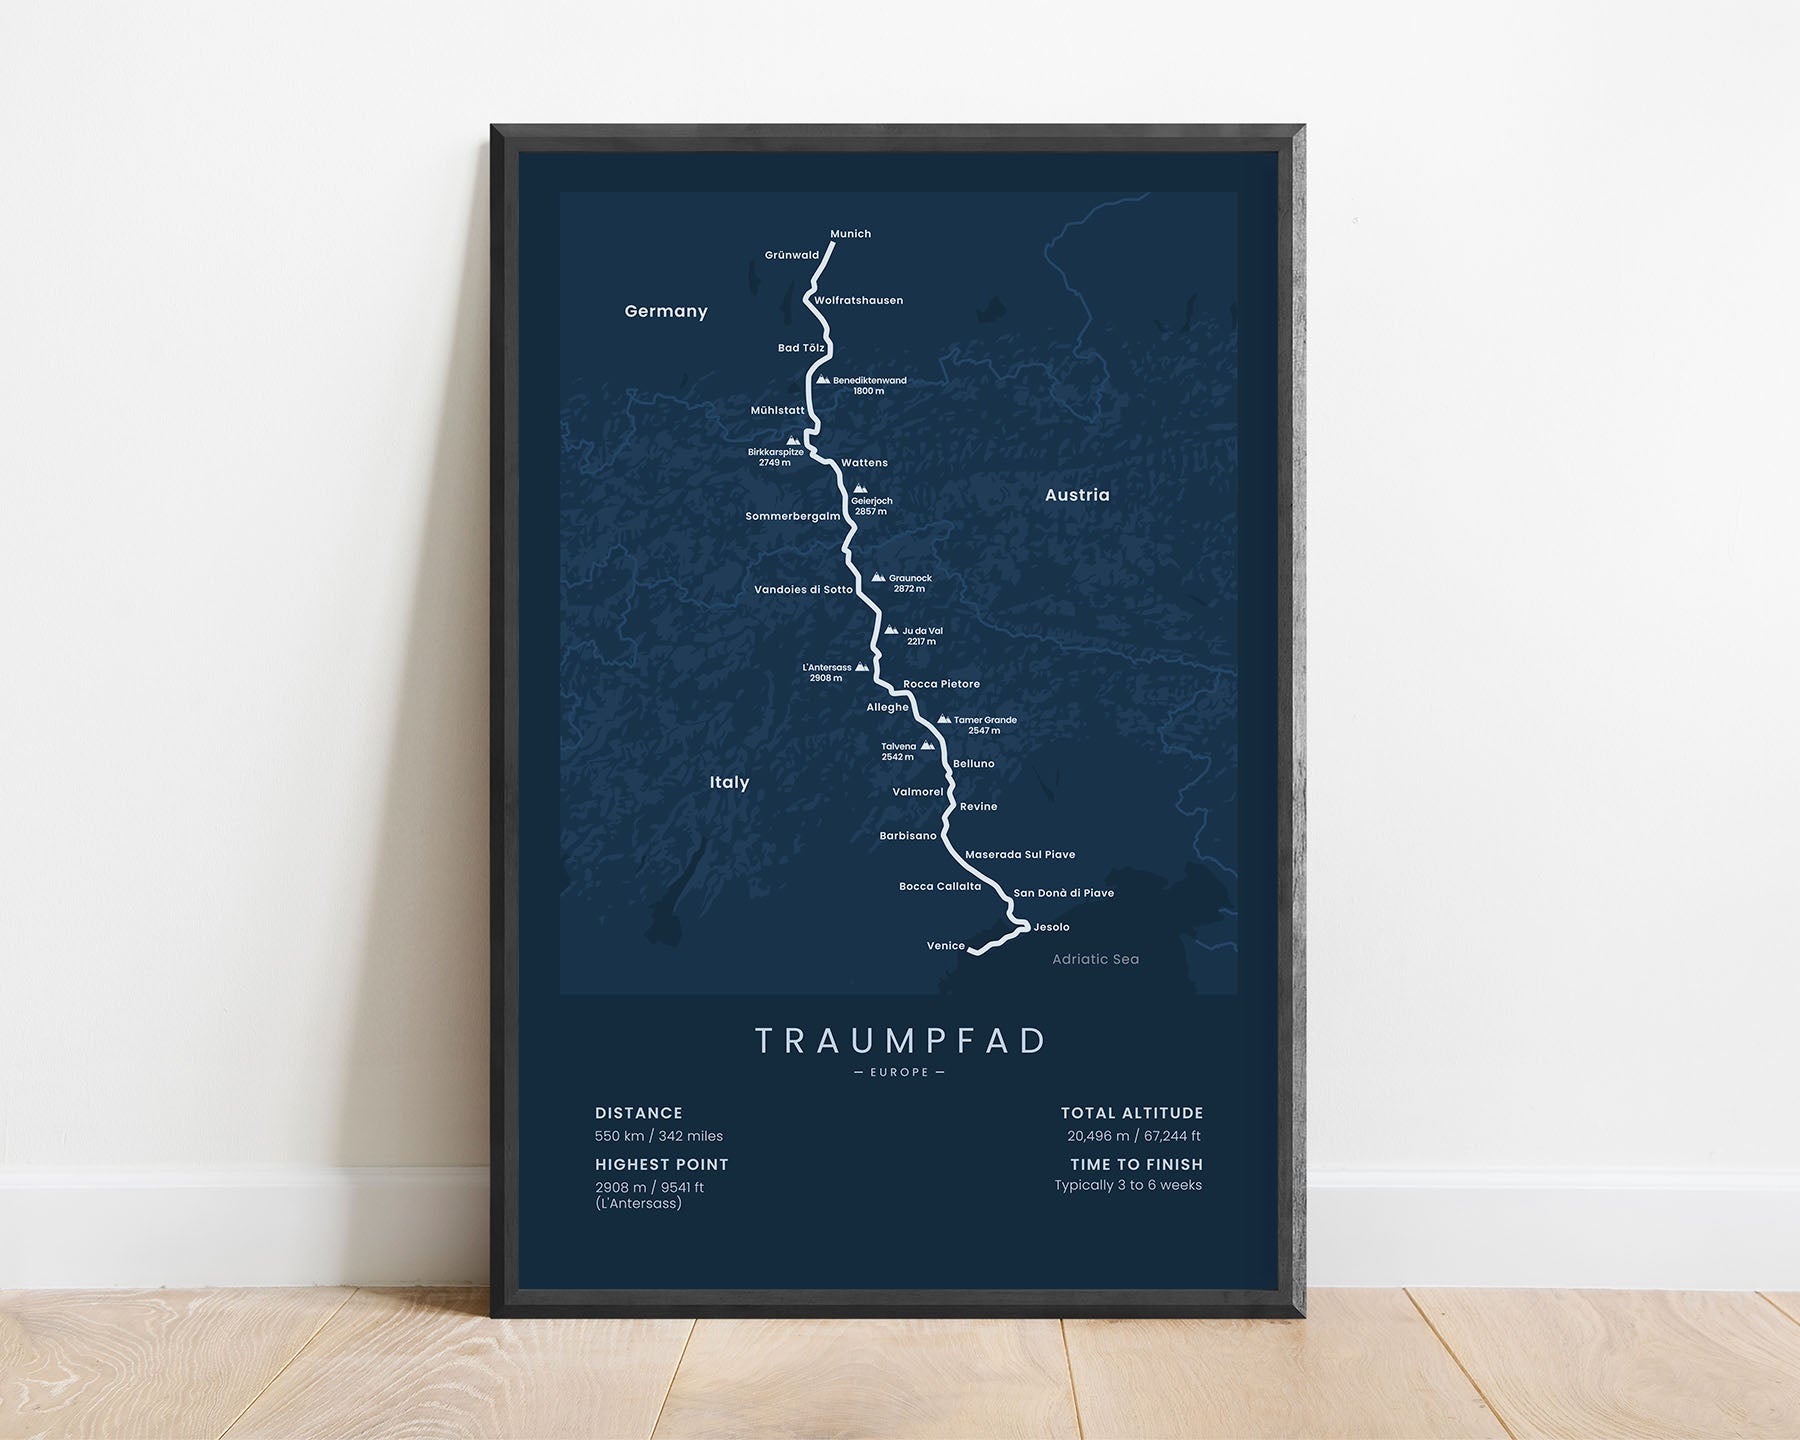 Traumpfad (Munich to Venice) track map art with blue background